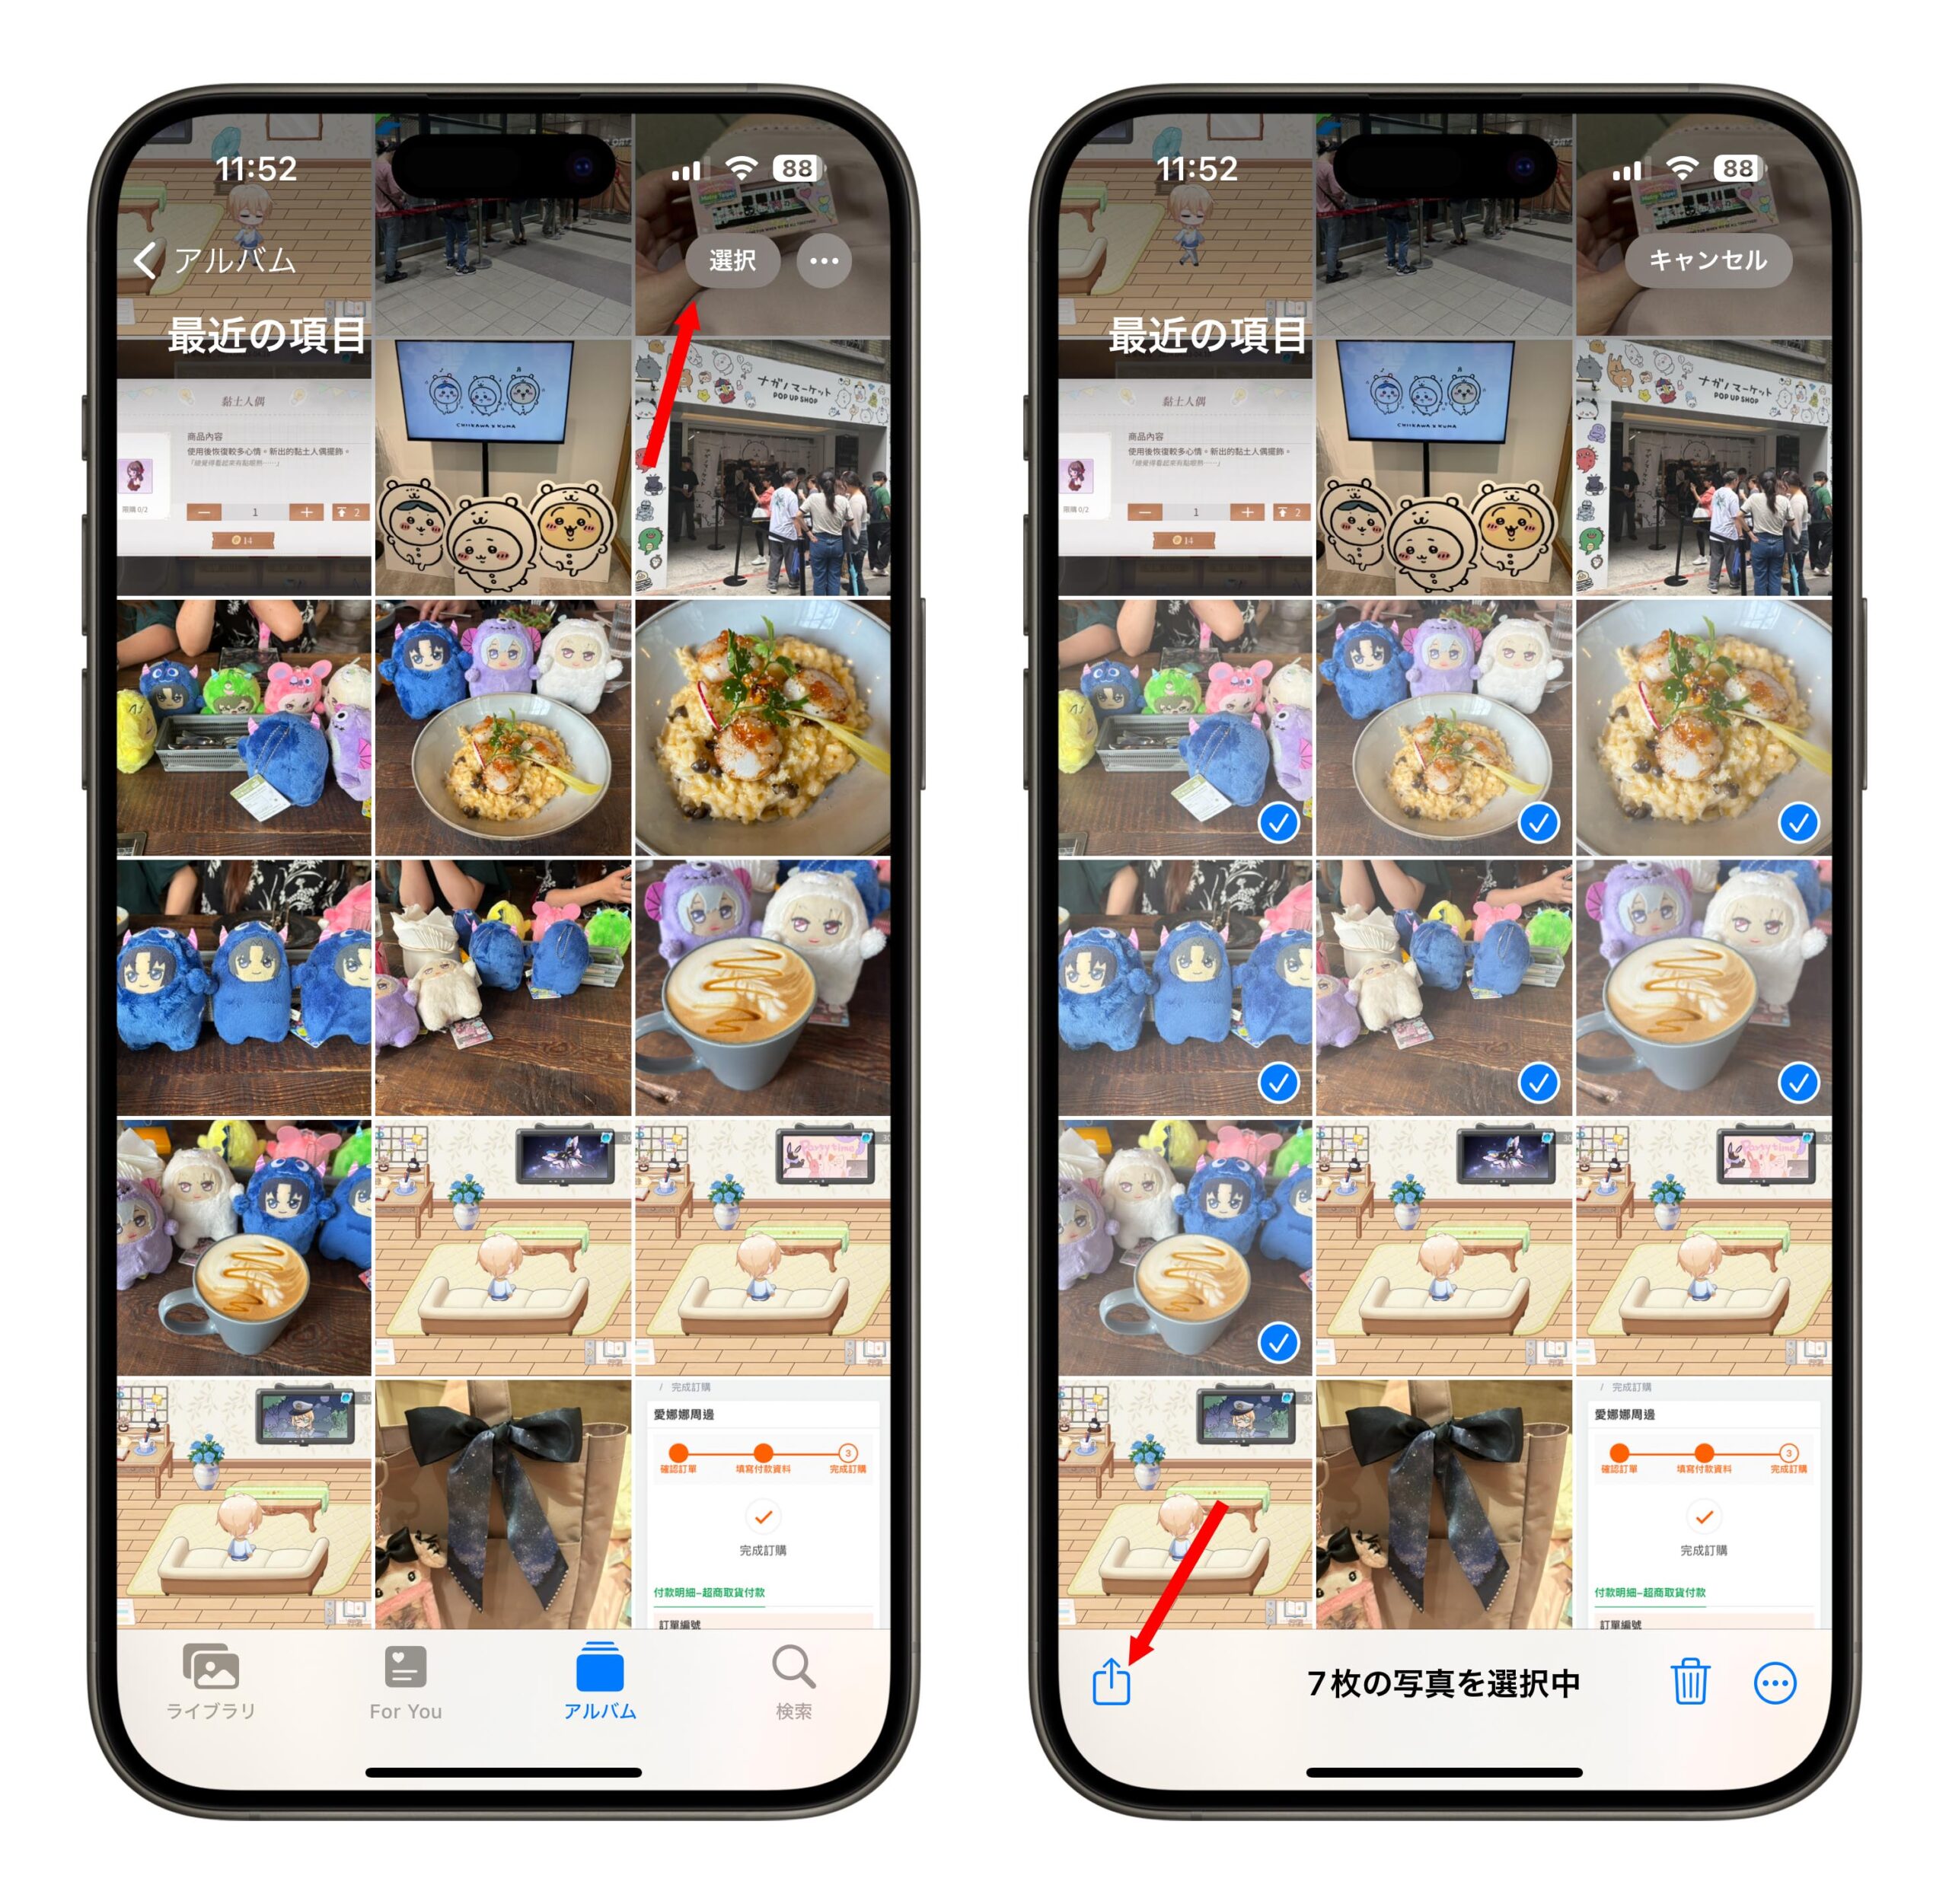 iPhone AirDrop で写真を送る方法